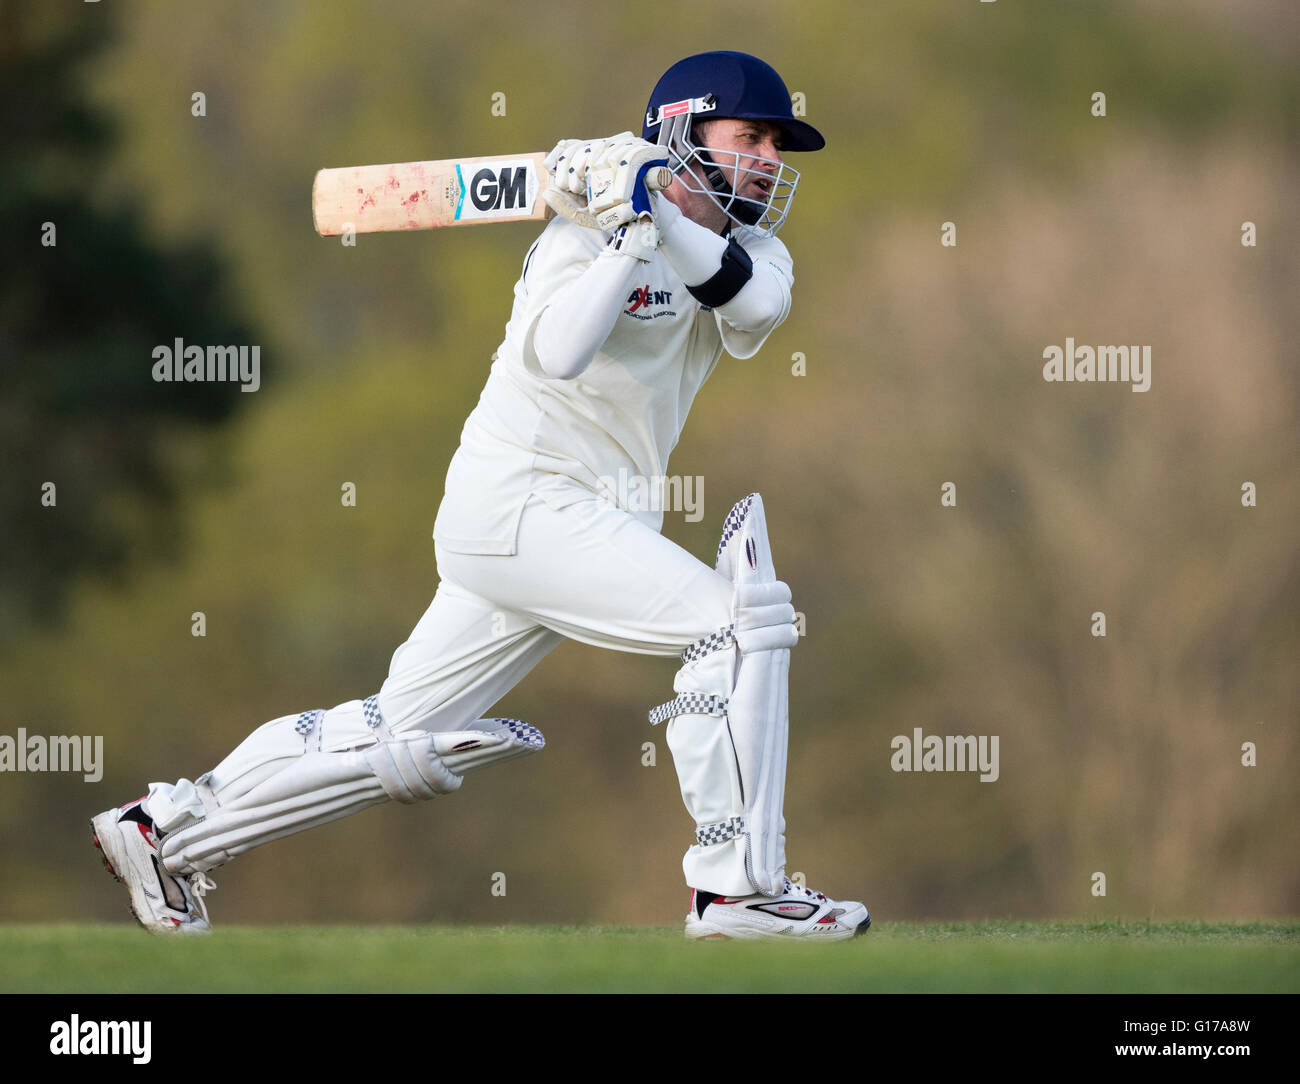 Marnhull CC 1st XI v Poole Town 2nd XI. Marnhull CC player in action batting. Stock Photo